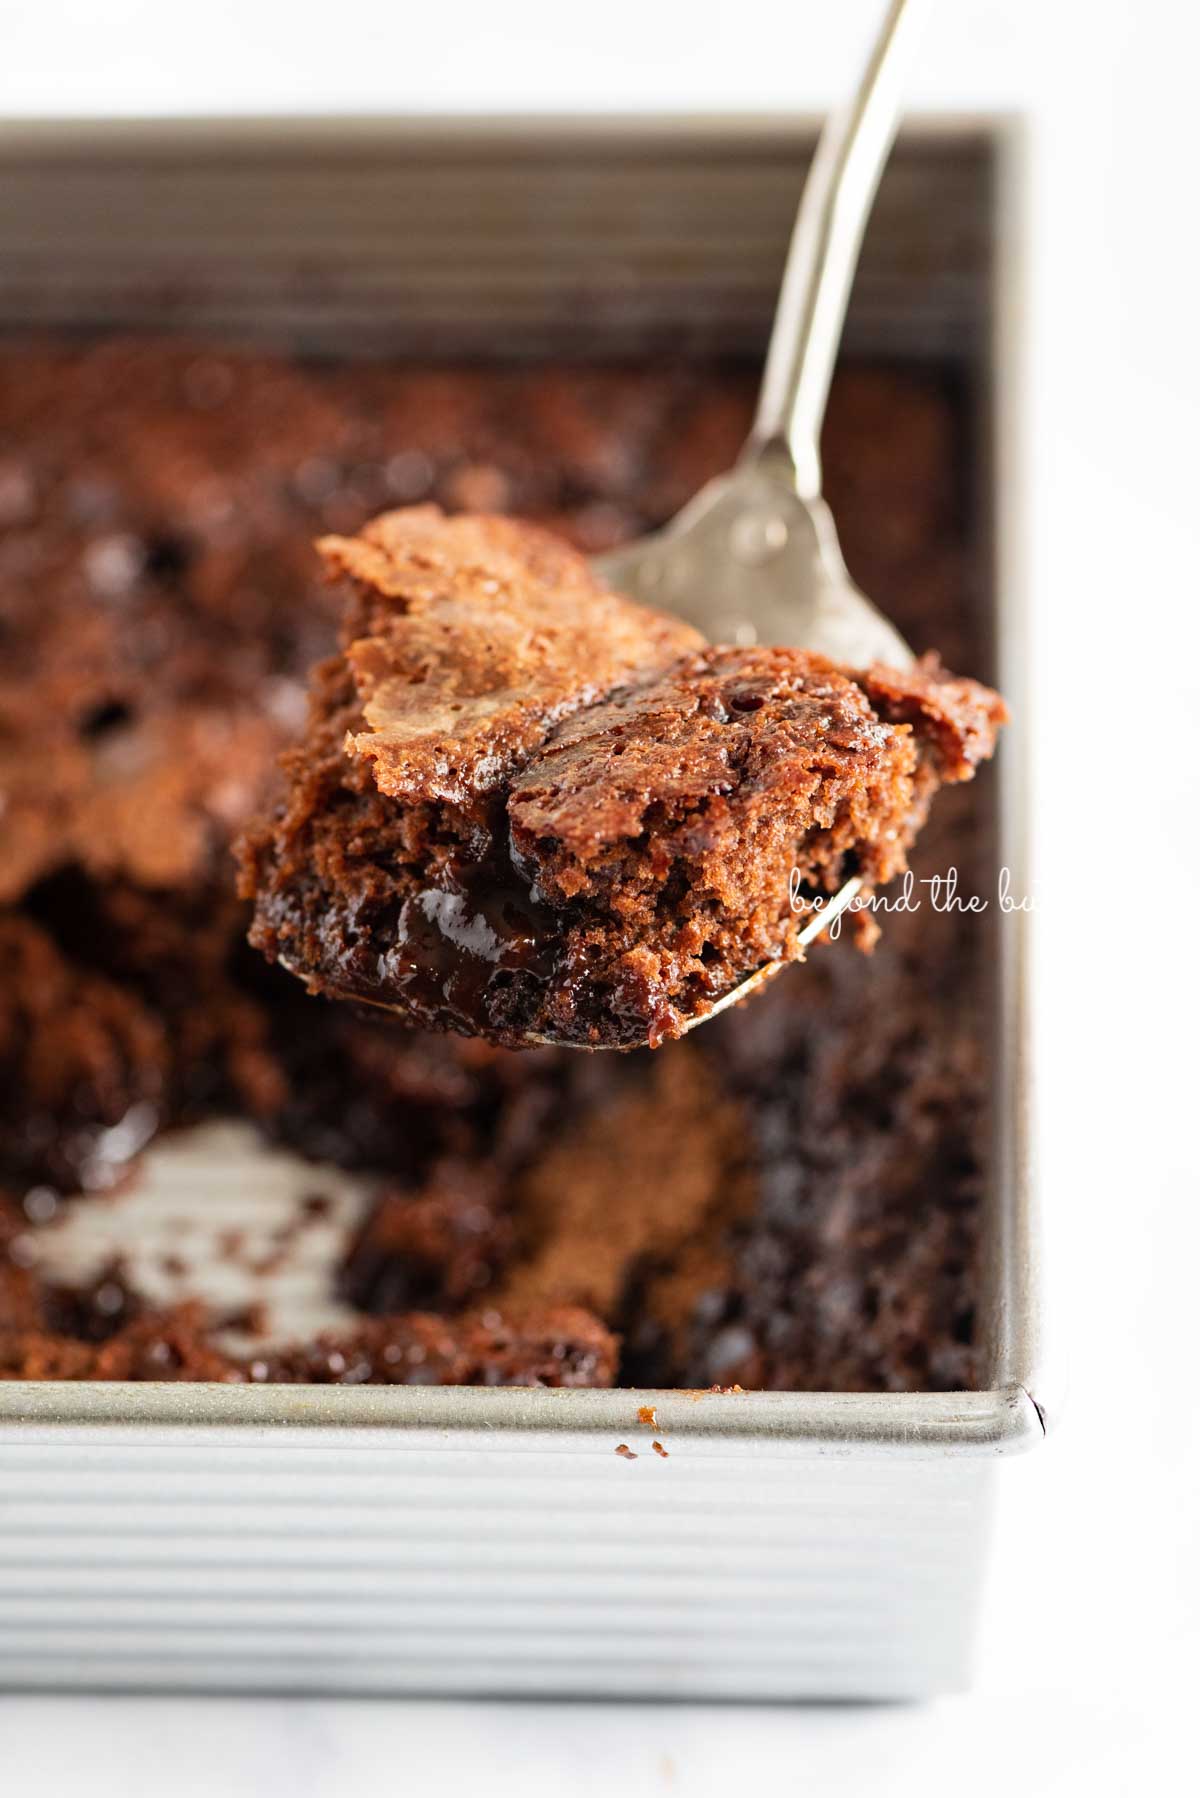 Serving up some hot fudge pudding cake from BeyondtheButter.com | © Beyond the Butter®